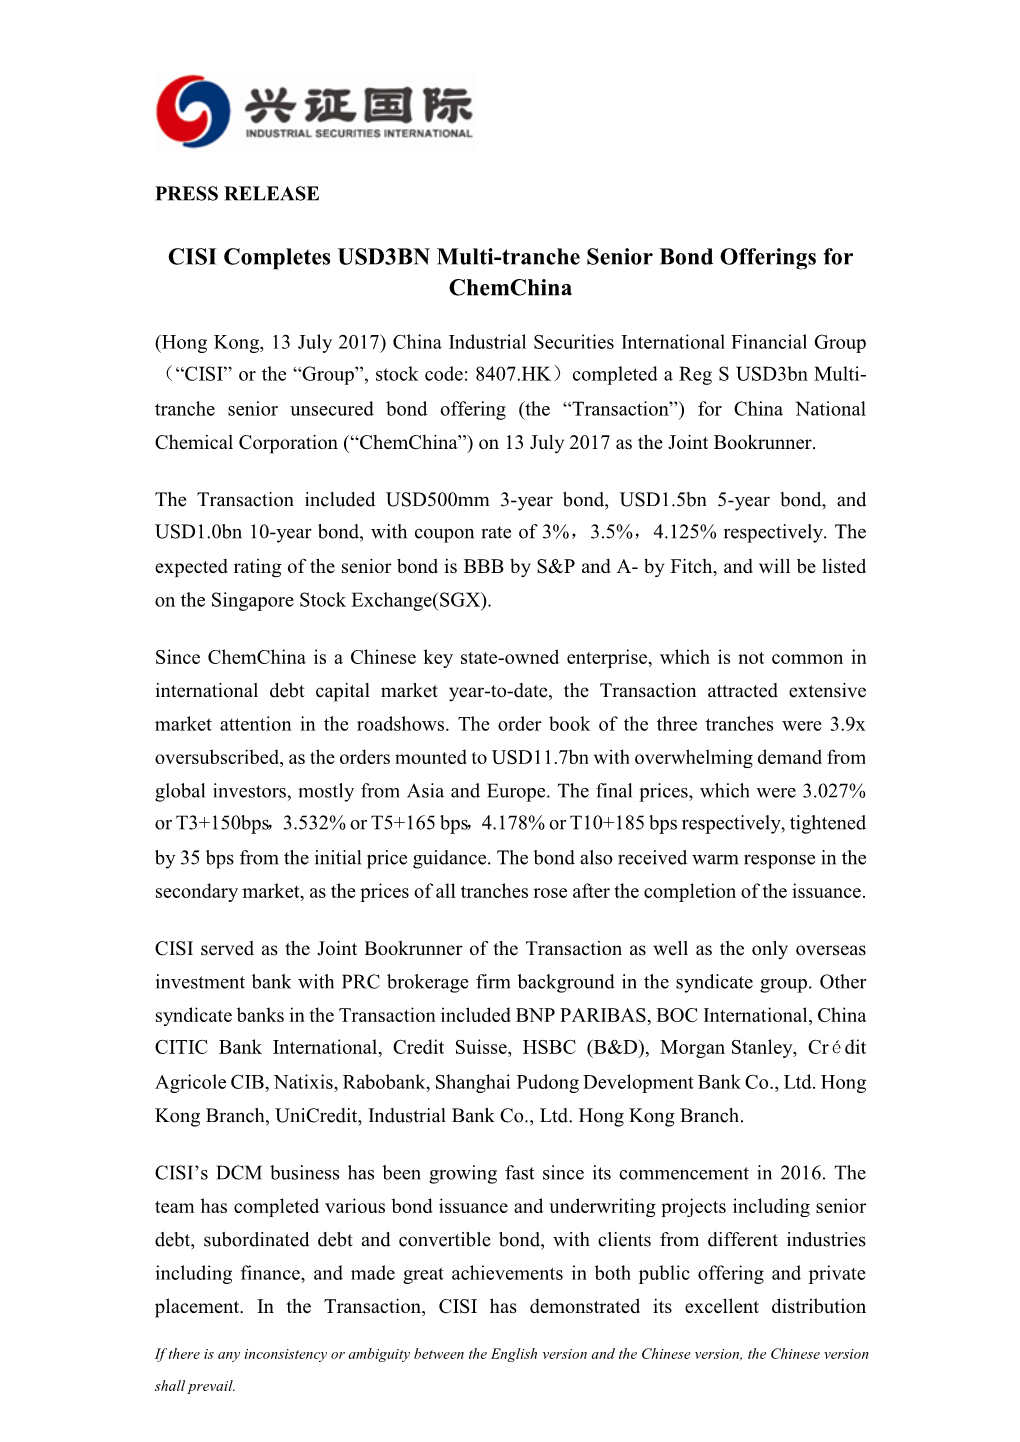 CISI Completes USD3BN Multi-Tranche Senior Bond Offerings for Chemchina